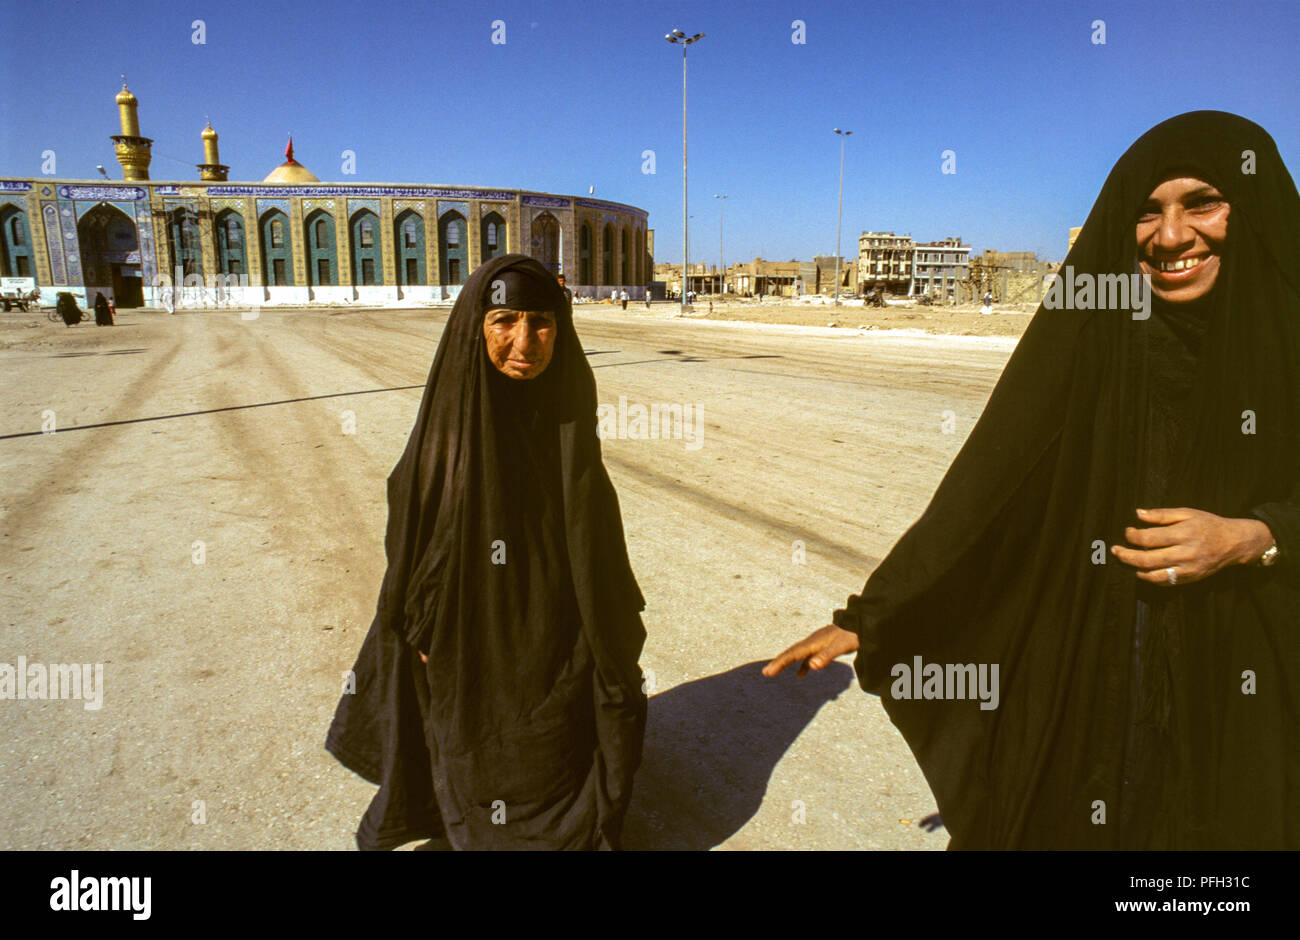 The entrance to the Shi'a Islamic Shrine in Karbala Stock Photo